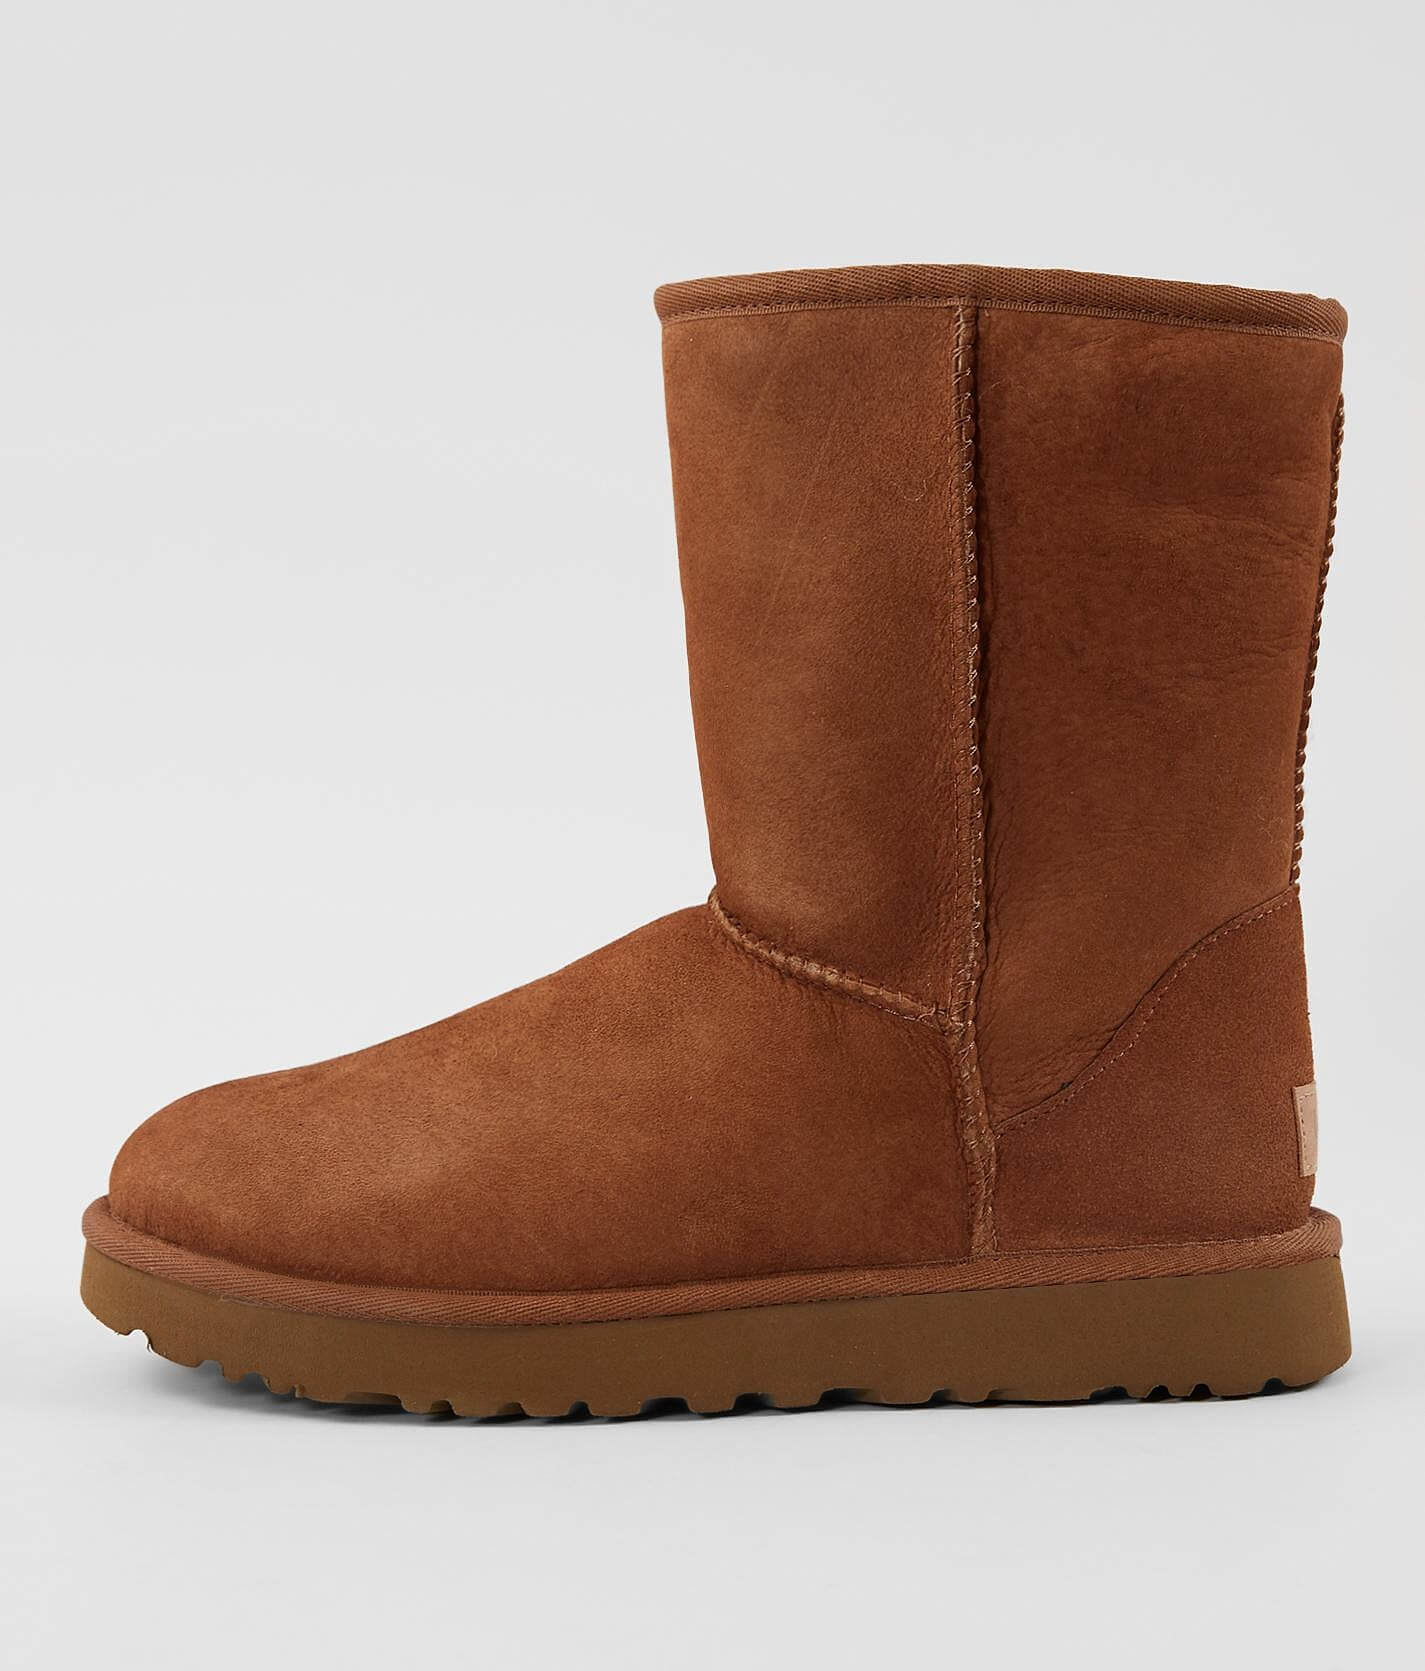 ugg short boot with buckle